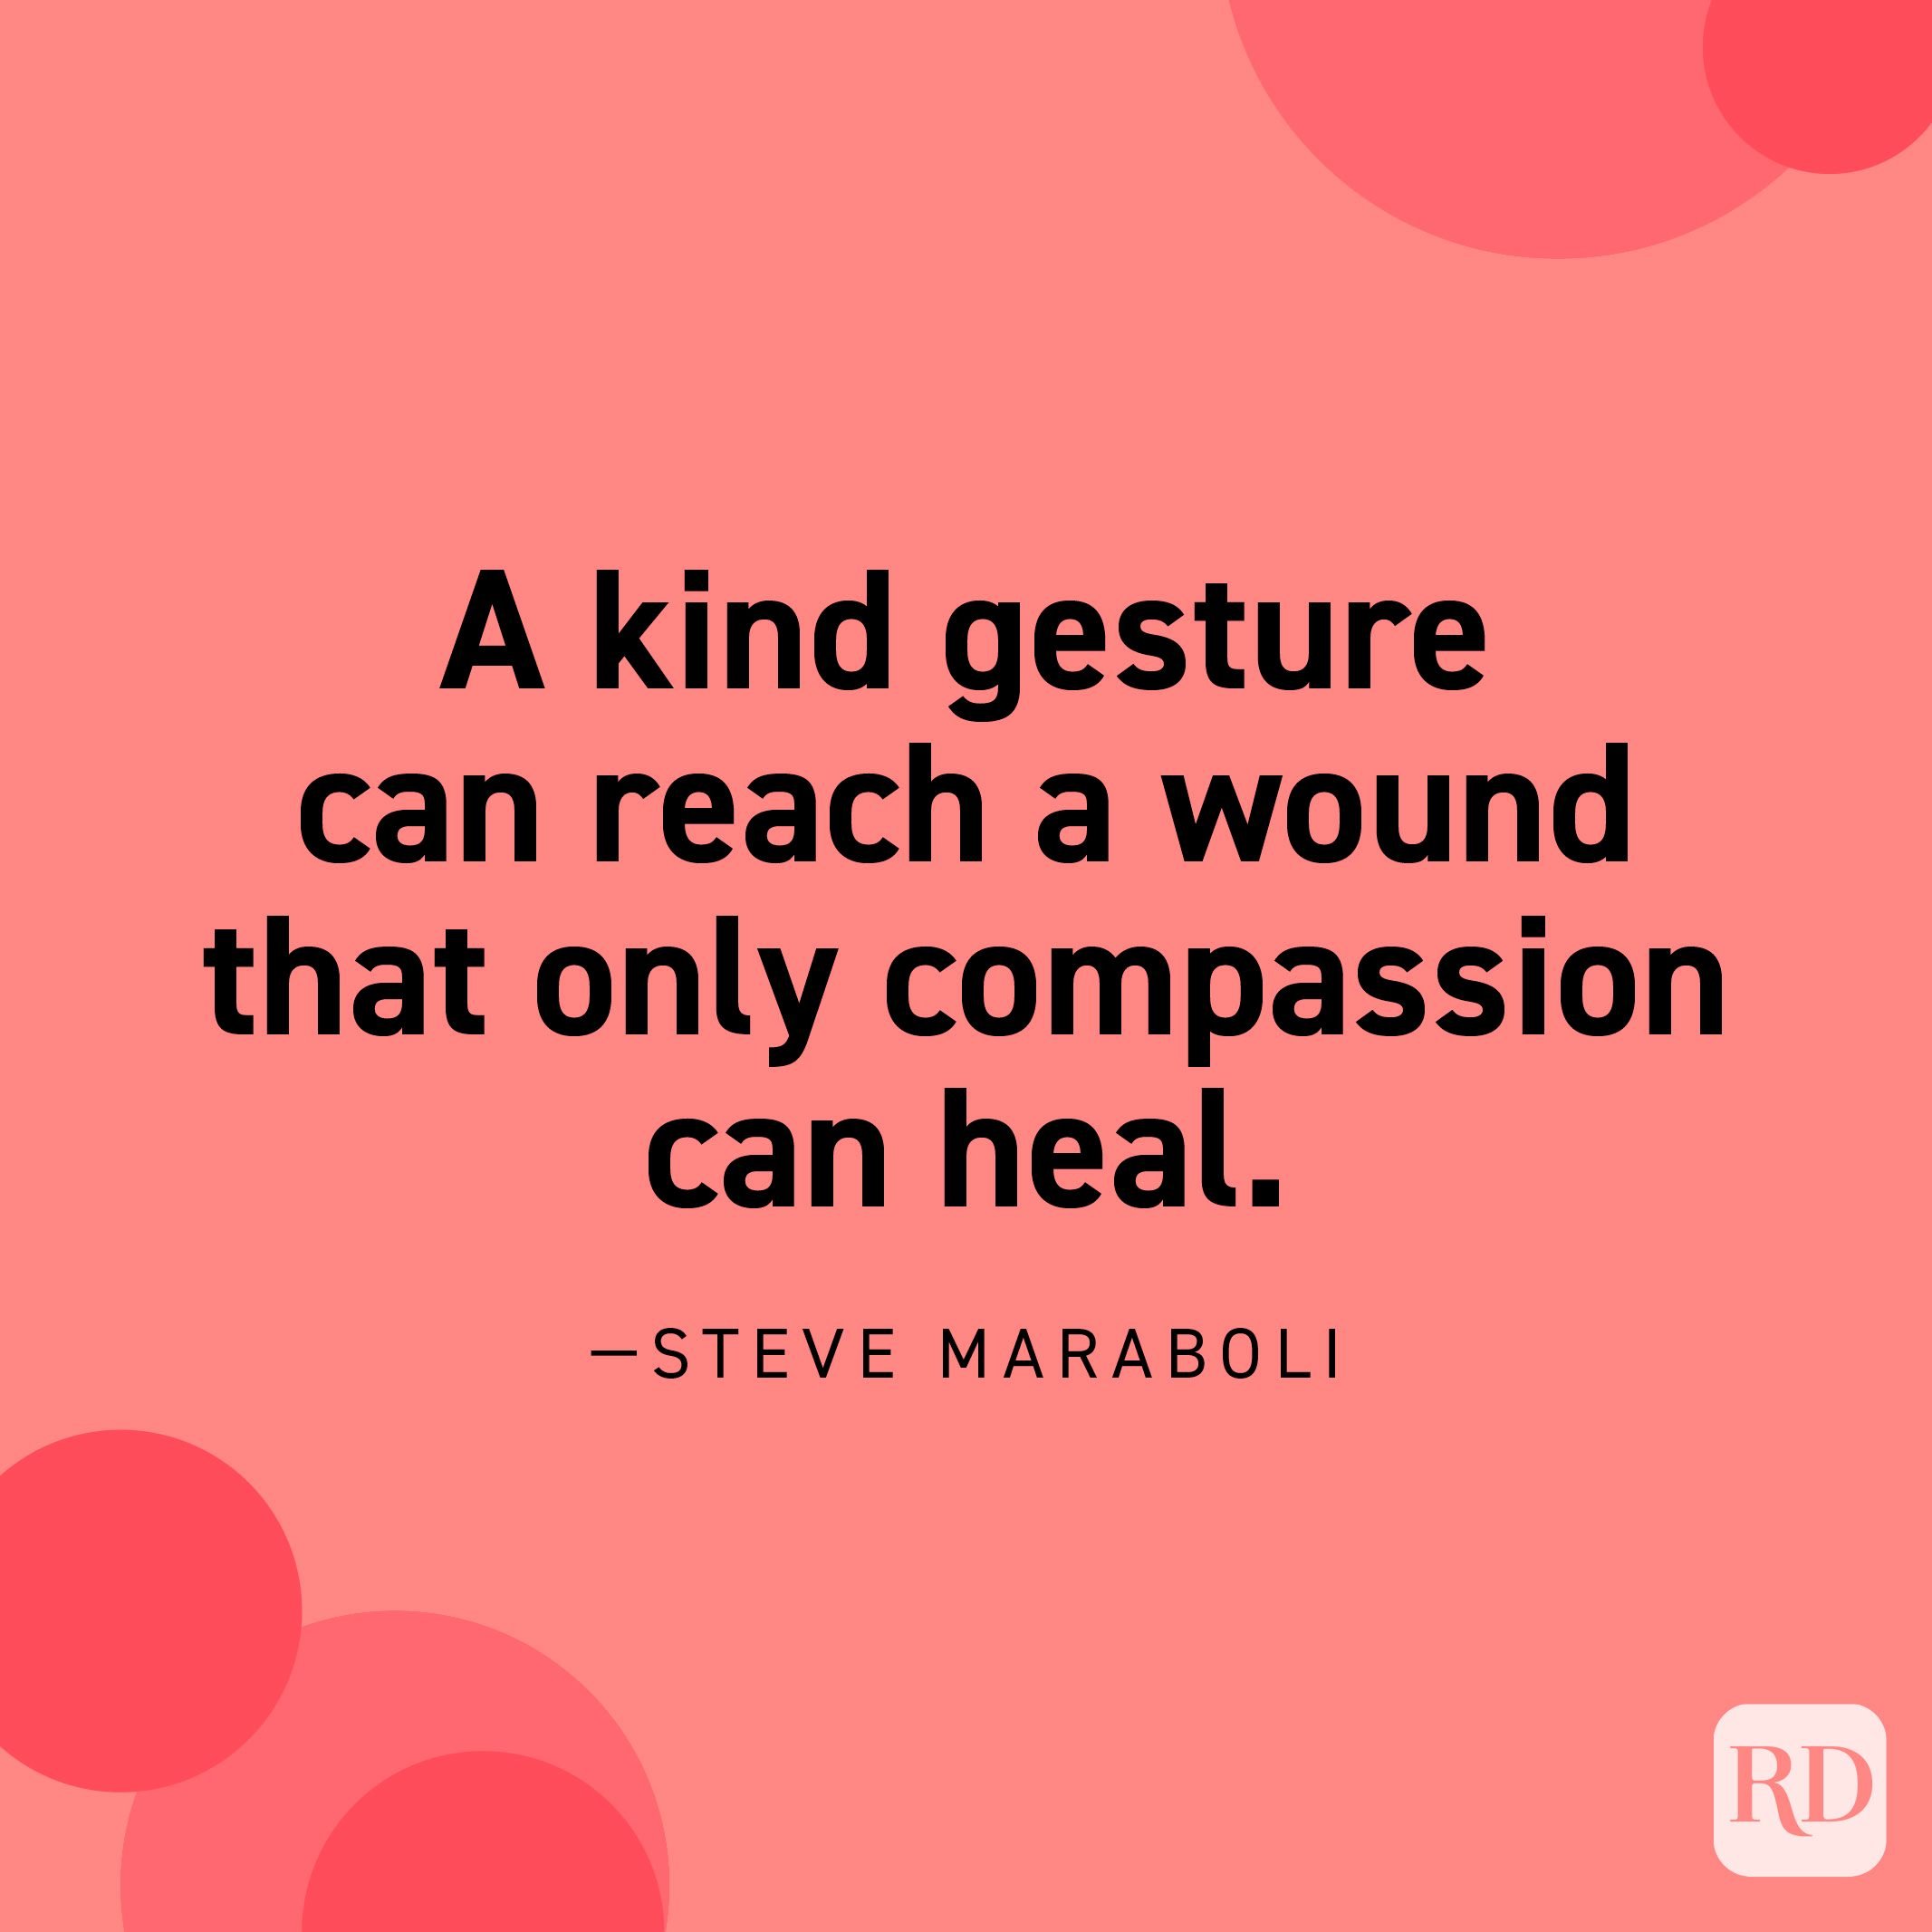 60 Powerful Kindness Quotes That Will Stay with You